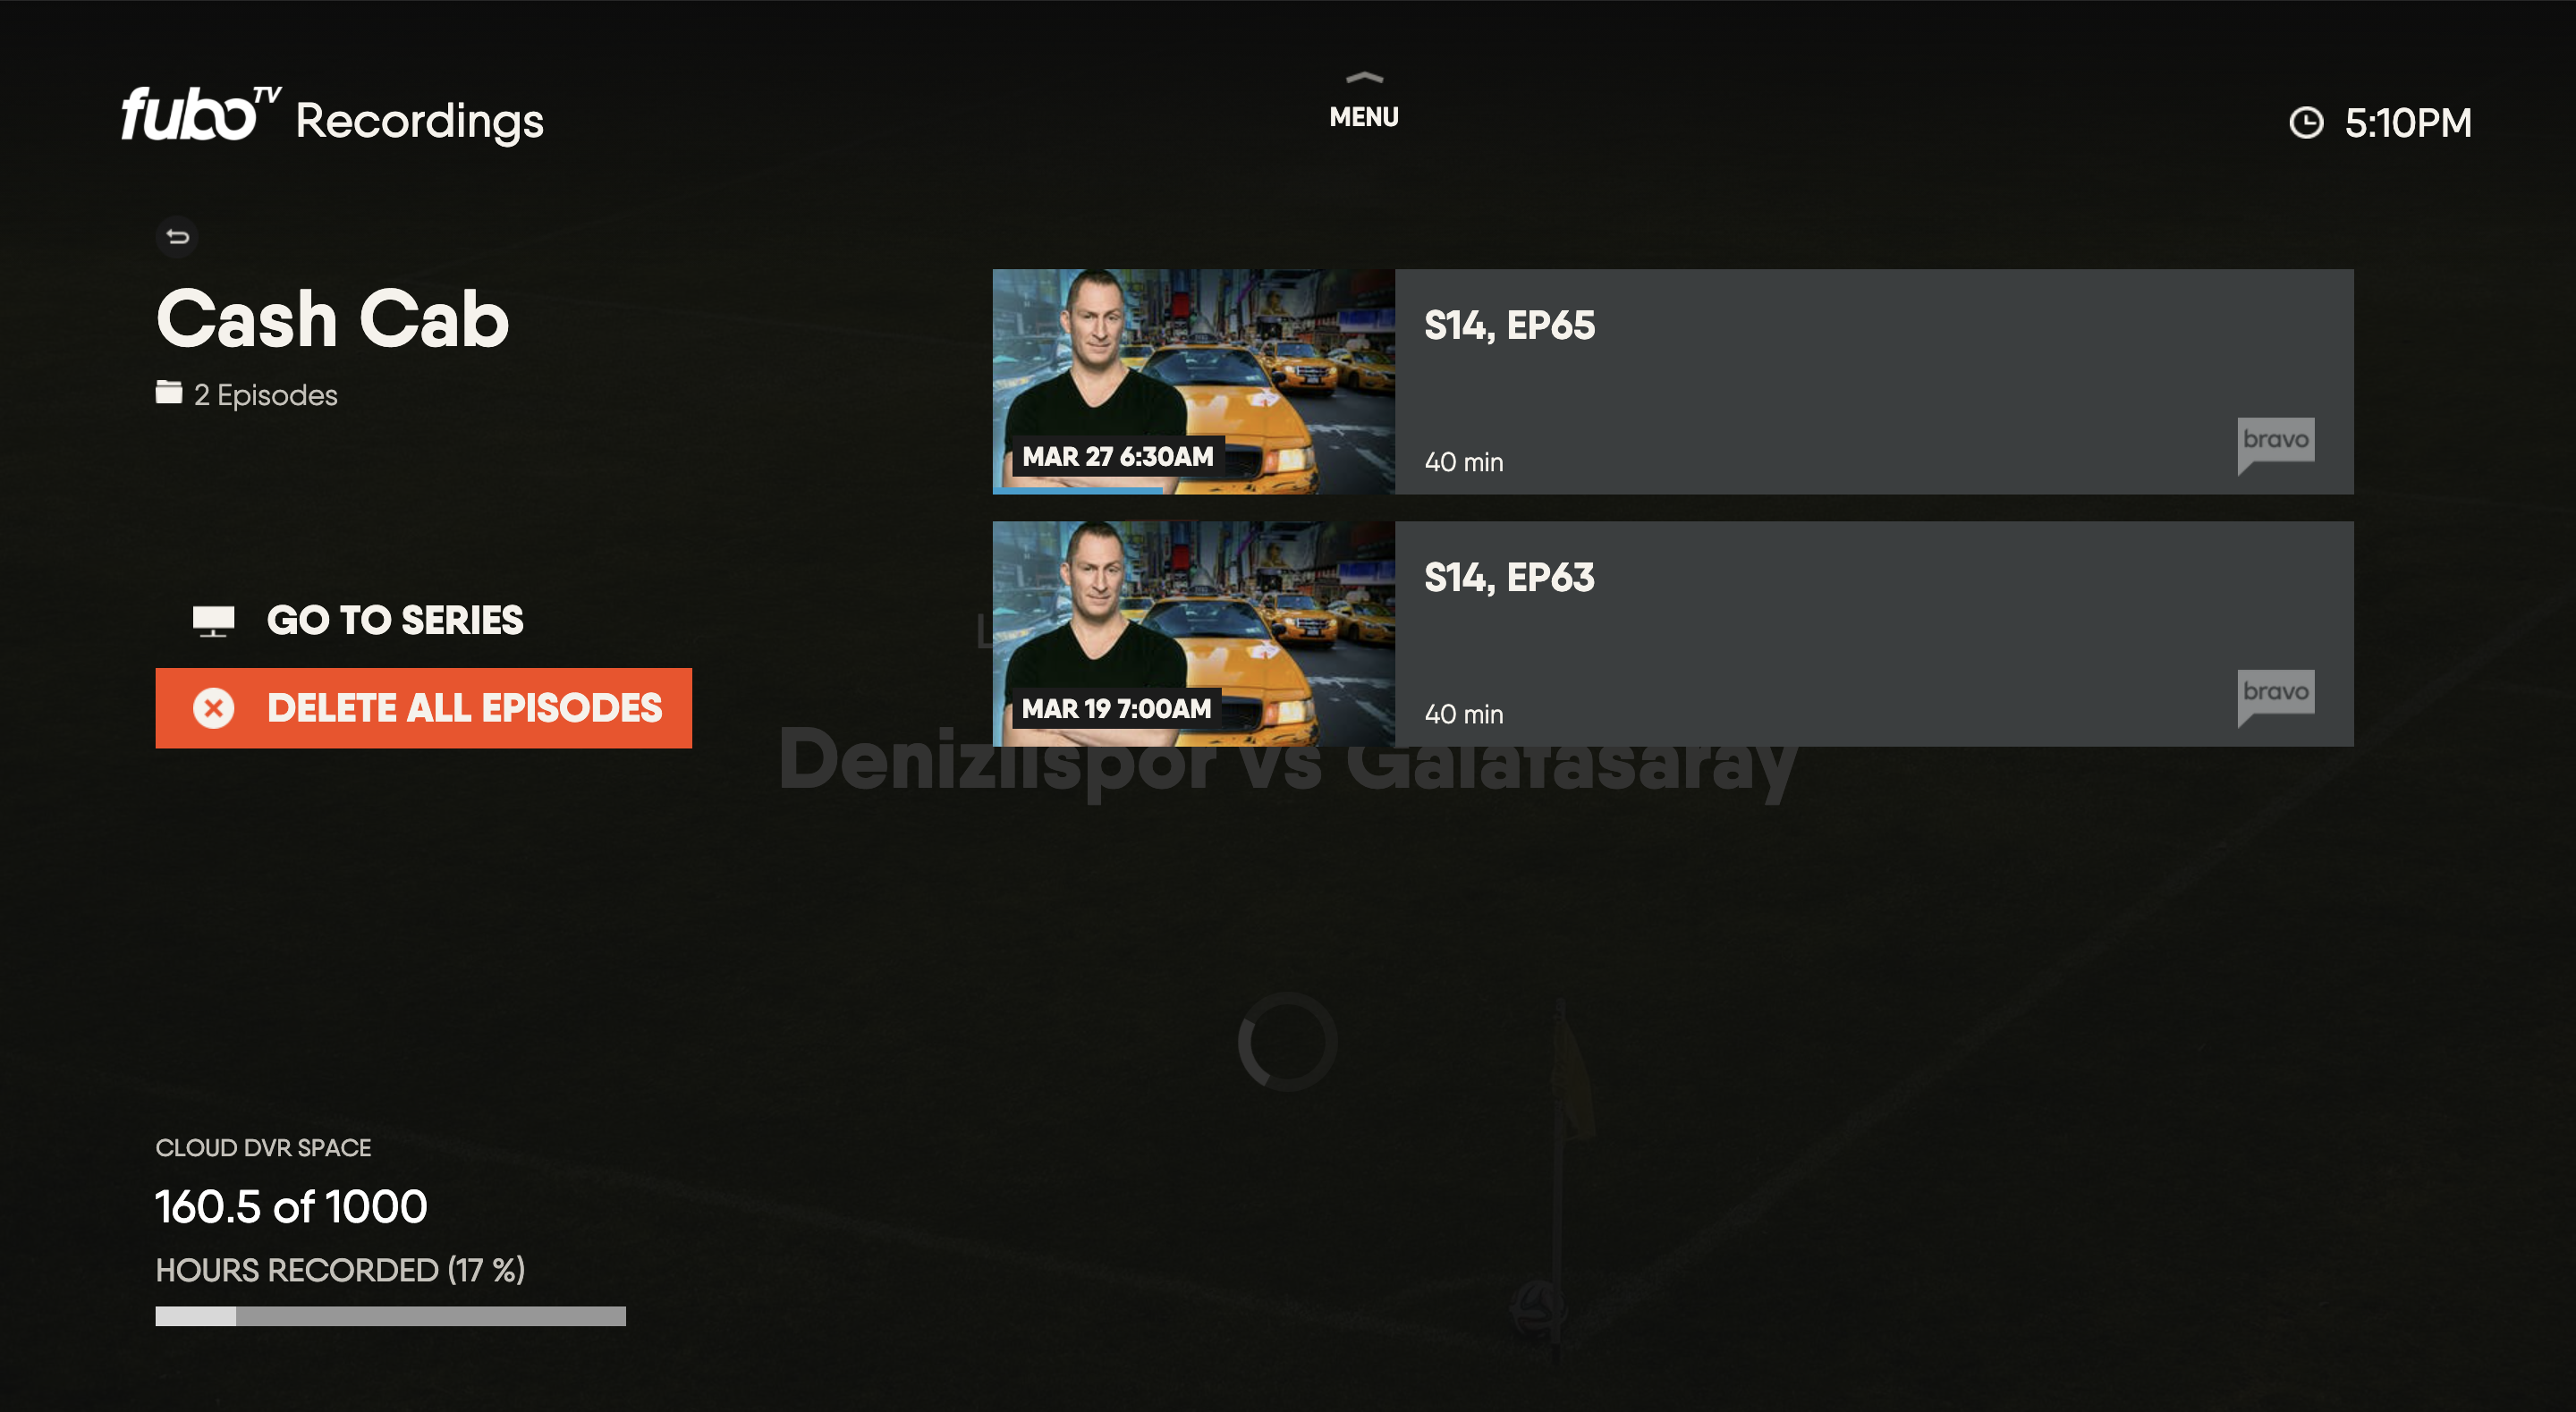 RECORDINGS screen of the FuboTV app on a Vizio TV with a recorded series highlighted